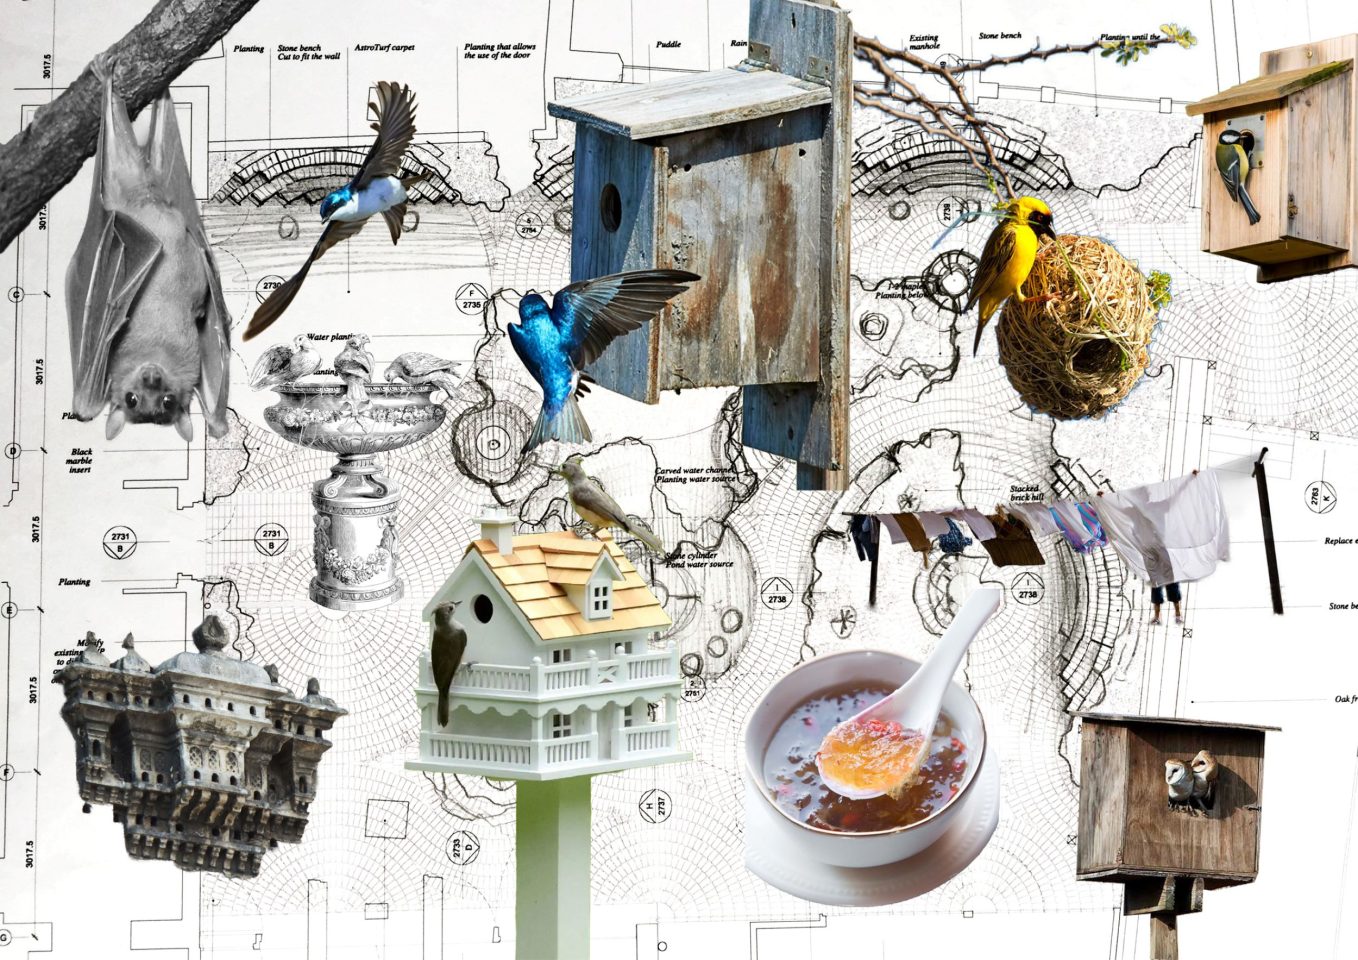 A collage with bird and bird houses. Behind the images of bird is a architecture plan for the South London Gallery's garden.